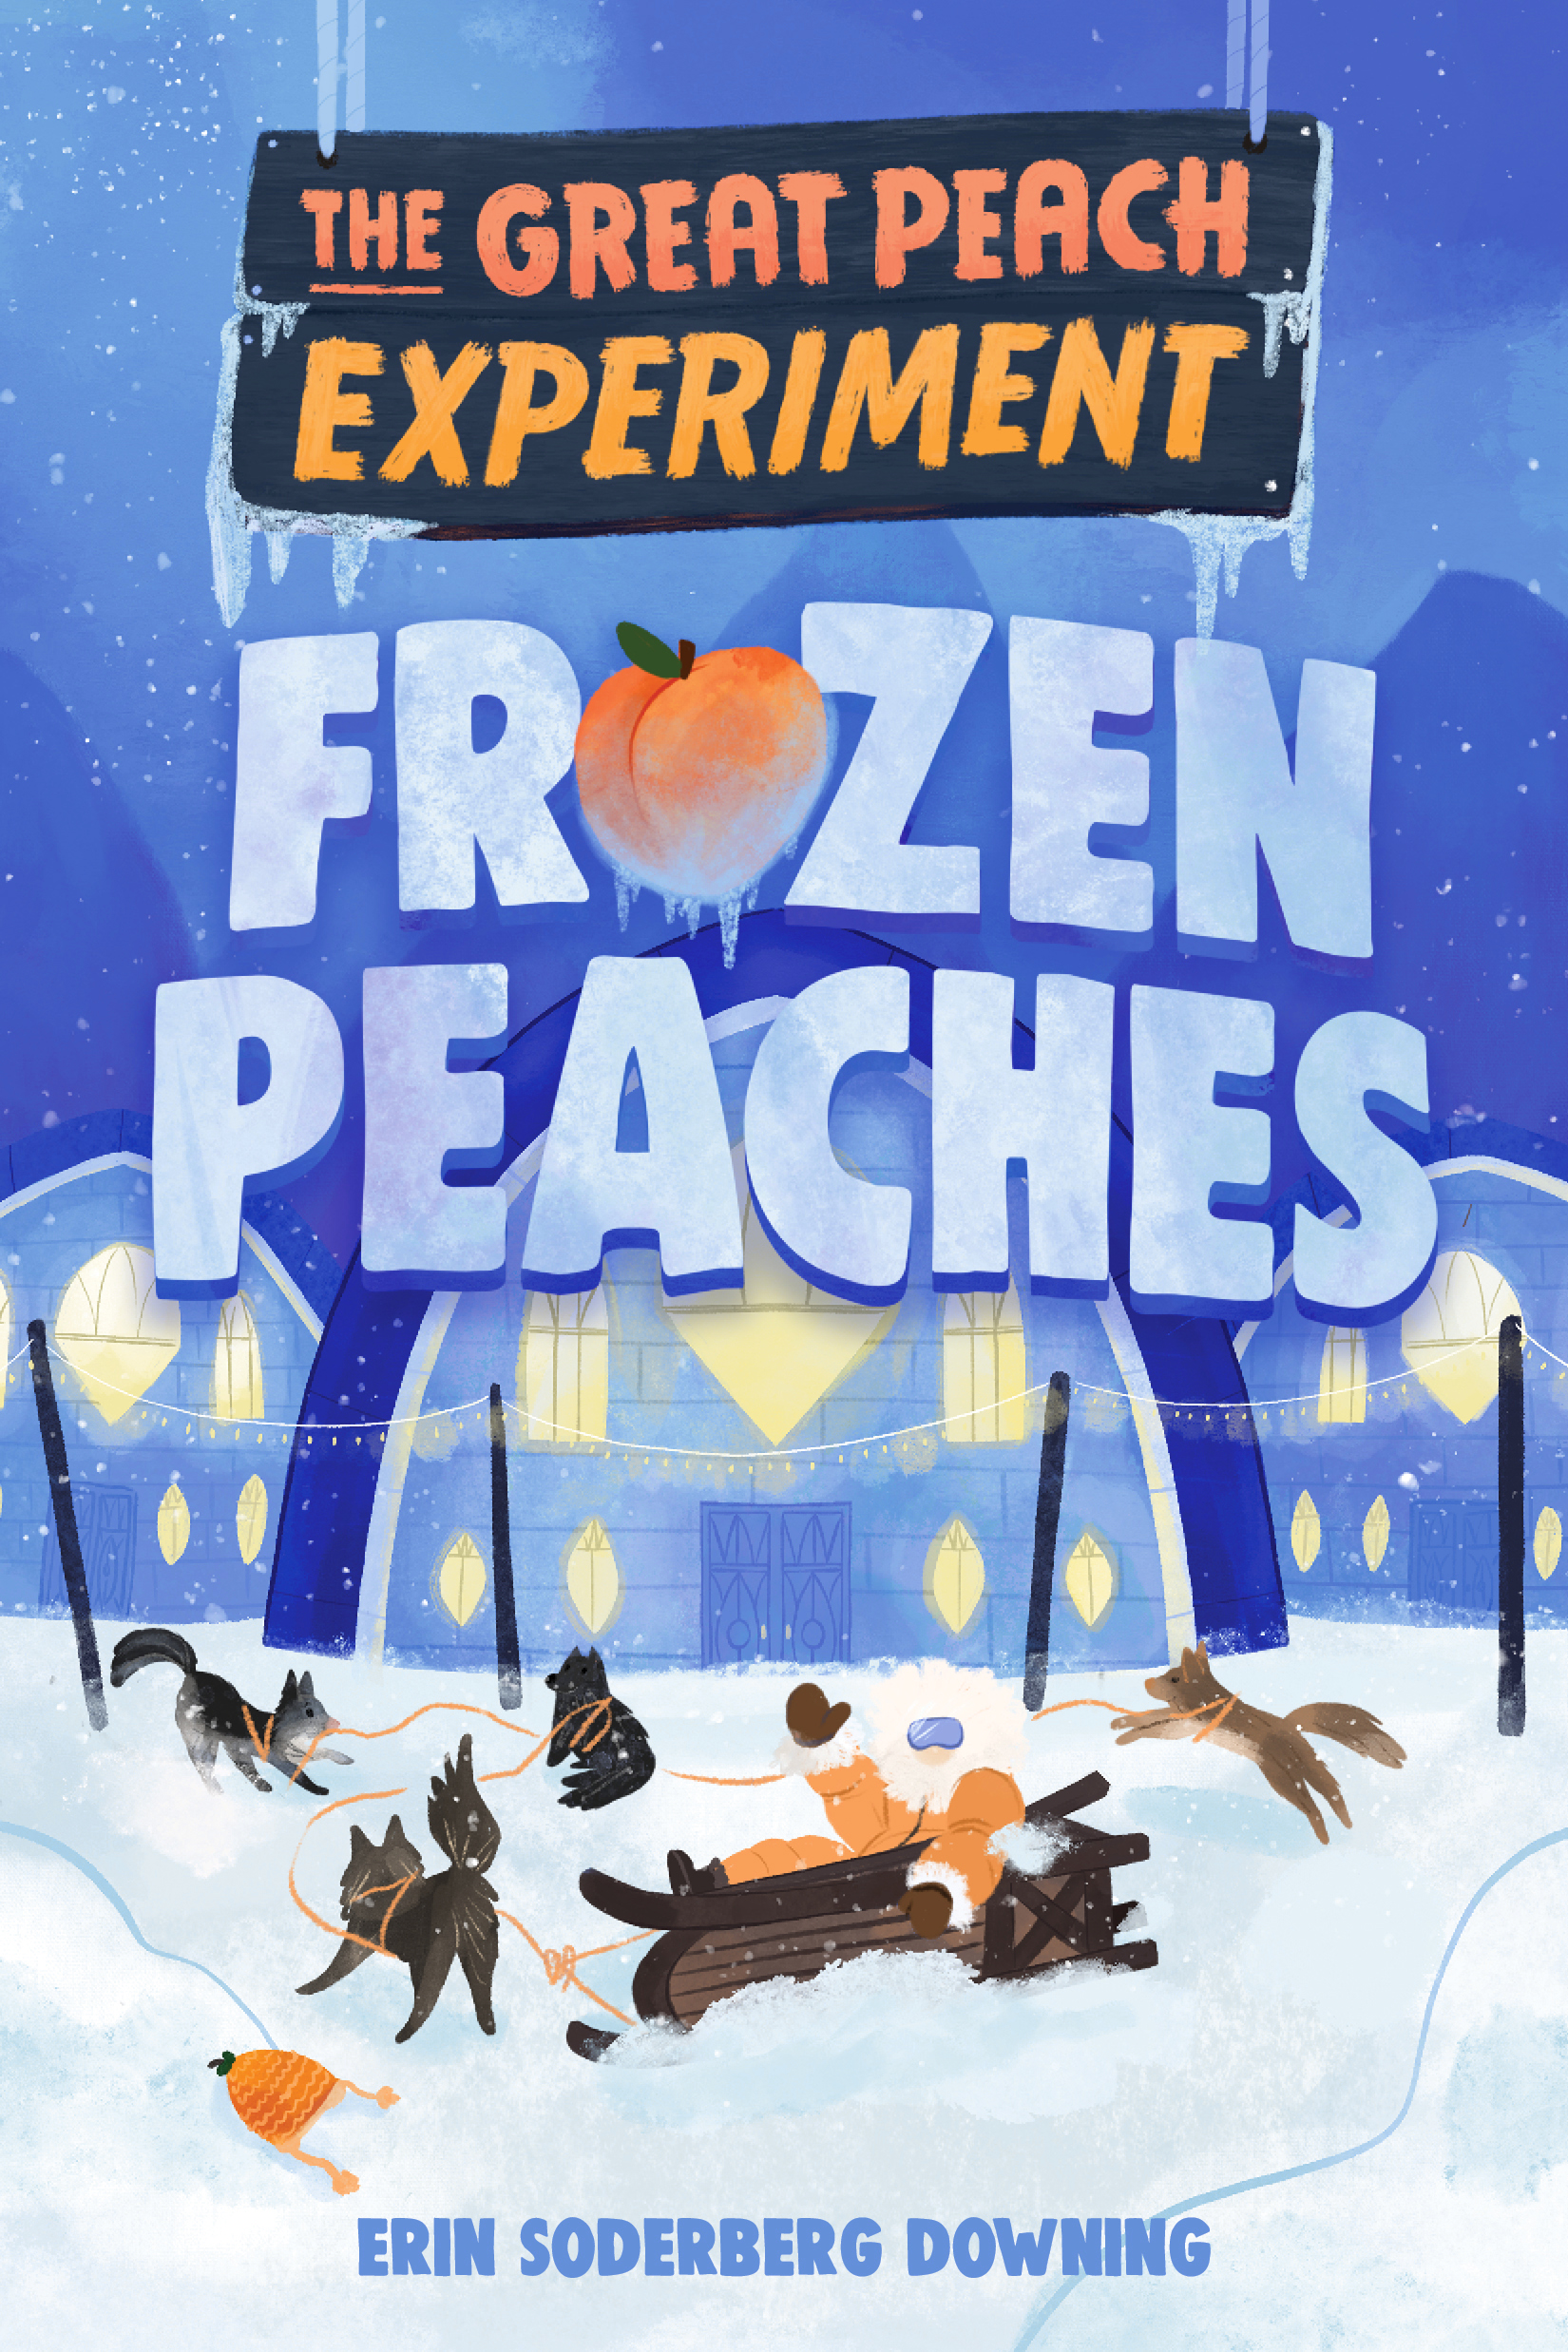 Peaches on Ice, a guest post by Erin Soderberg Downing